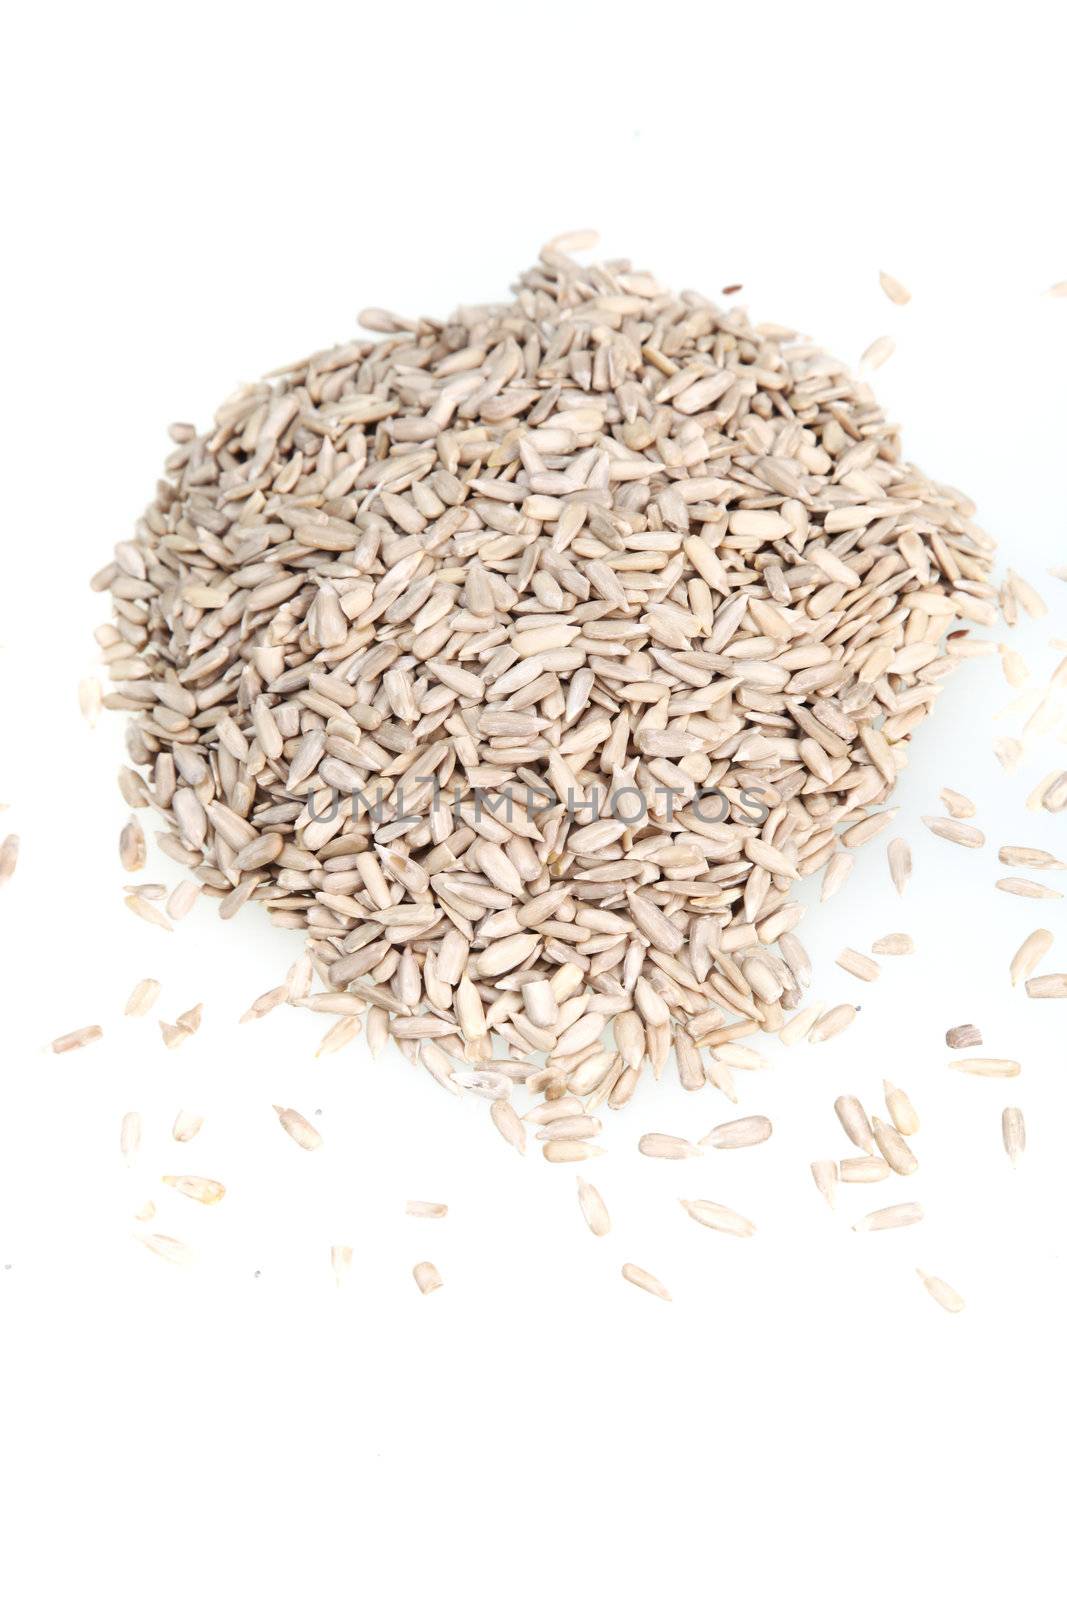 Pile of dehulled sunflower raw seed kernels on a white background for use as an ingredient in cooking or to produce sunflower oil